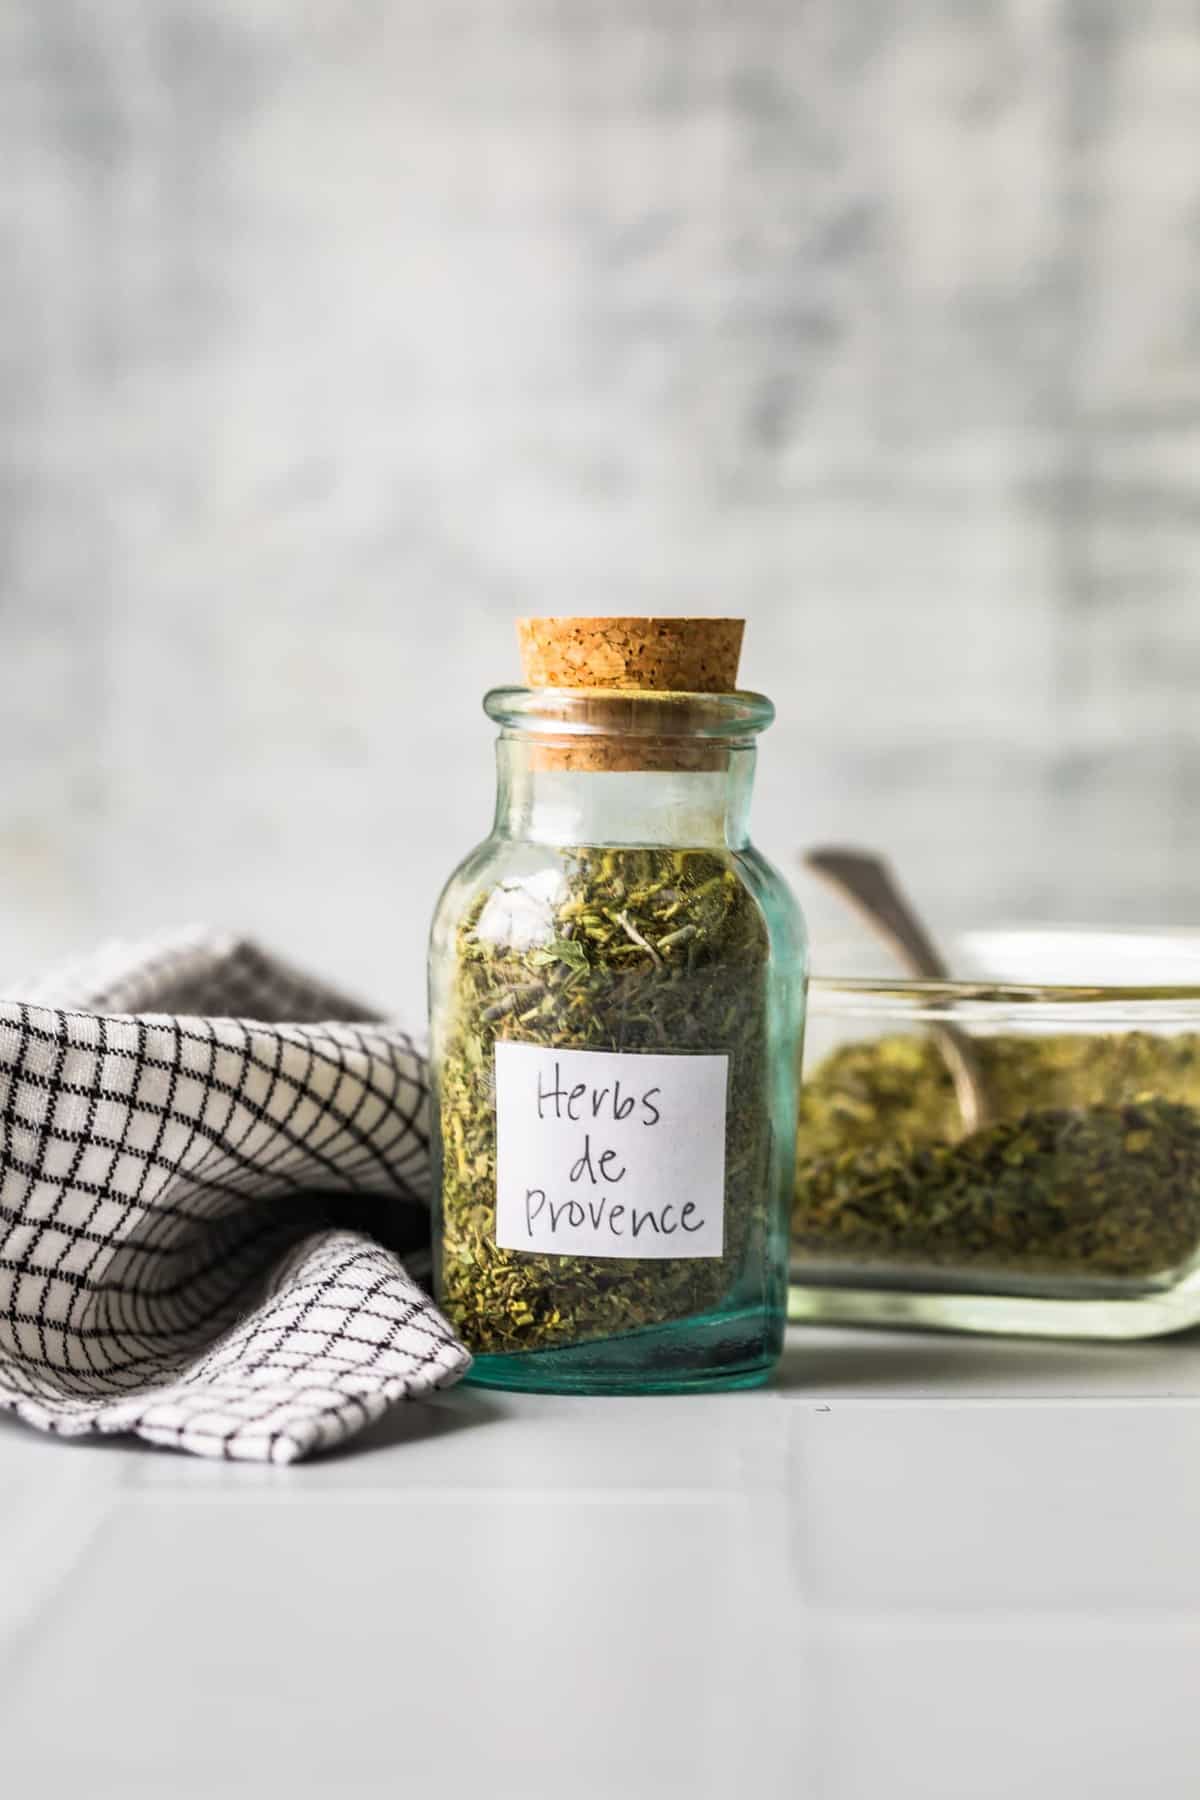 A jar of Herbs de Provence with a label